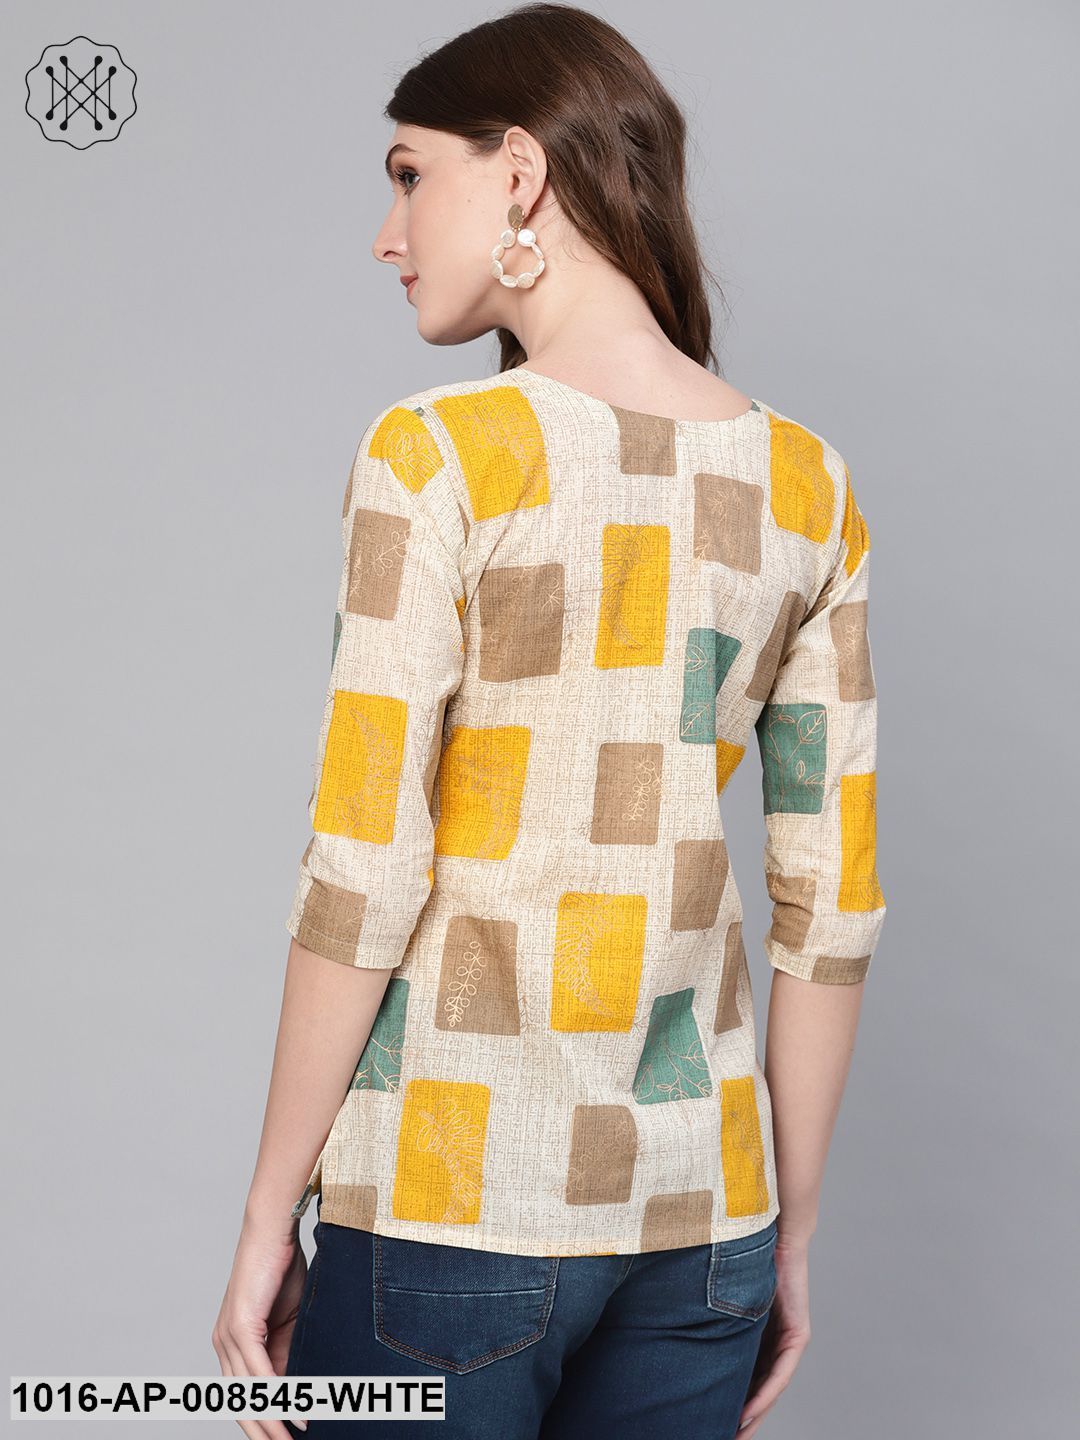 Off White & Multi Colored Printed Top With Round Neck & 3/4 Sleeves